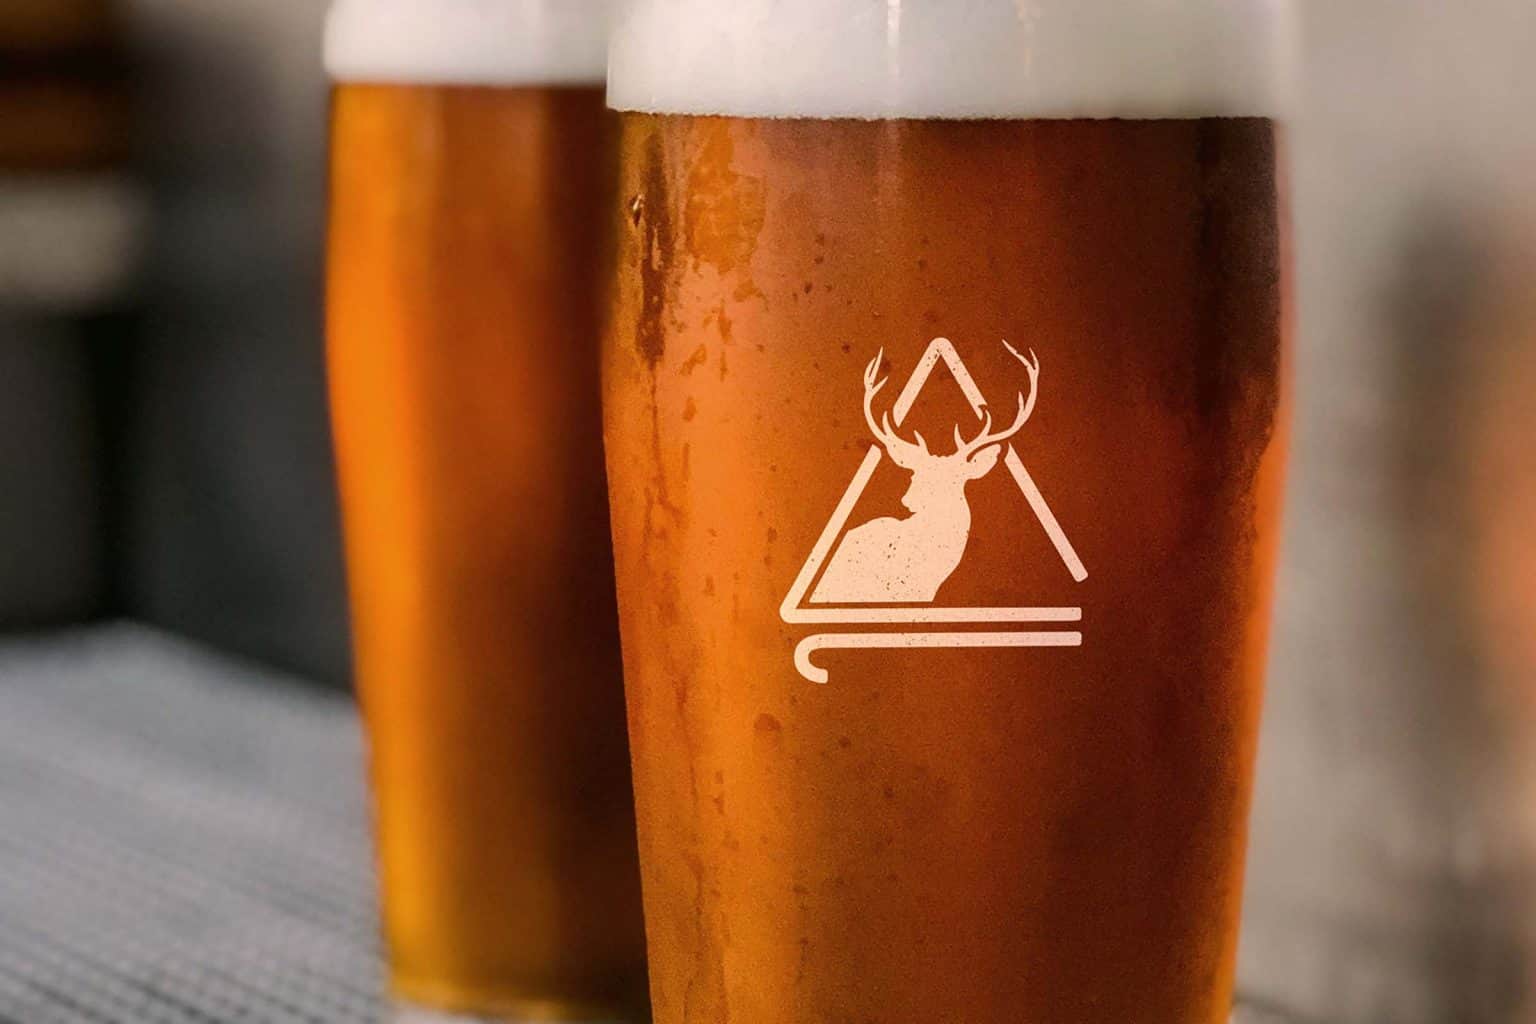 A photo of a beer glass with the Deer Lodge logo.